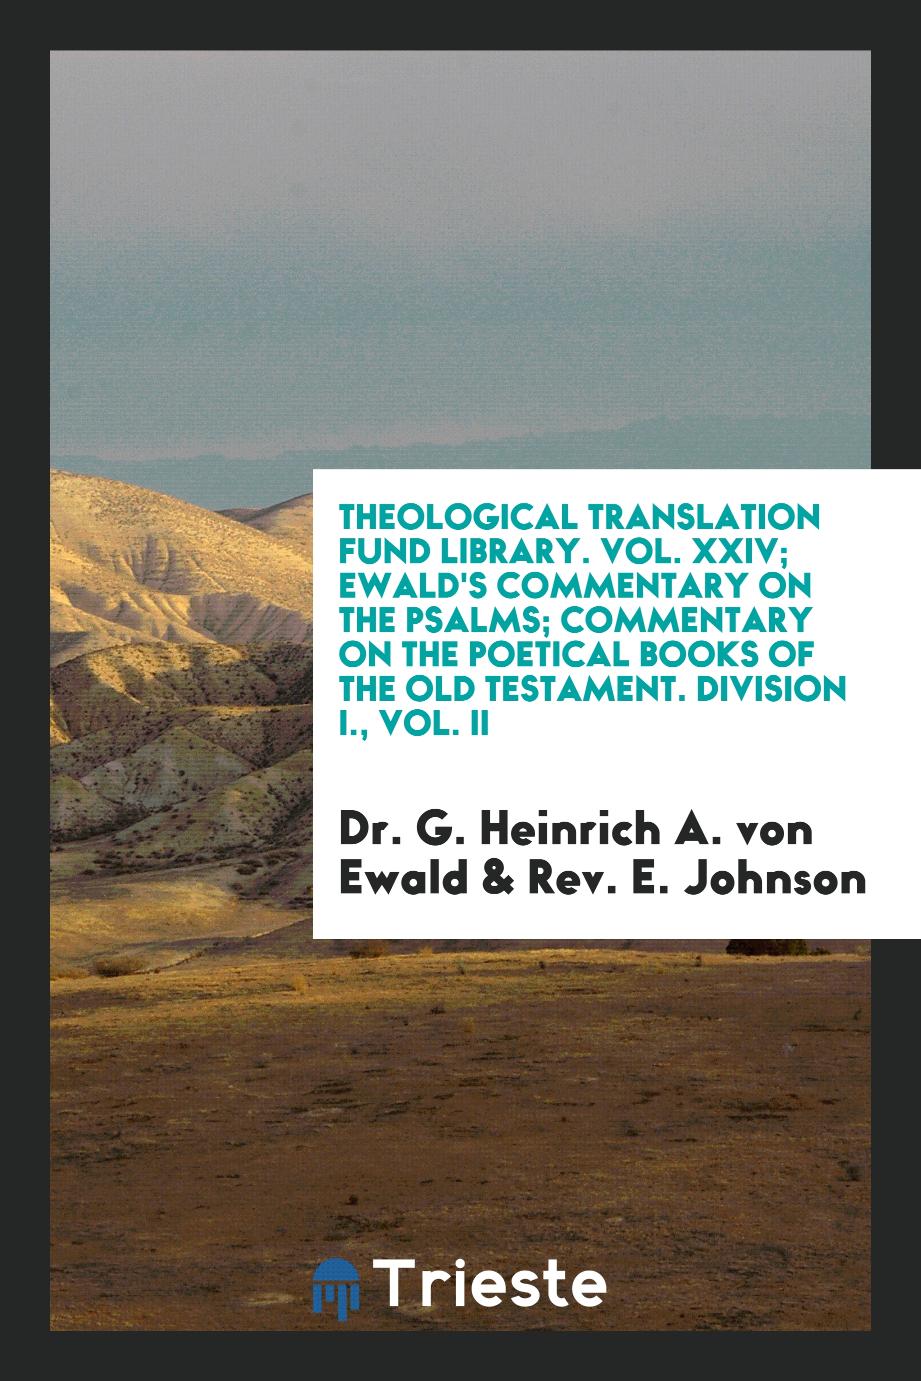 Theological Translation Fund Library. Vol. XXIV; Ewald's Commentary on the Psalms; Commentary on the Poetical Books of the Old Testament. Division I., Vol. II